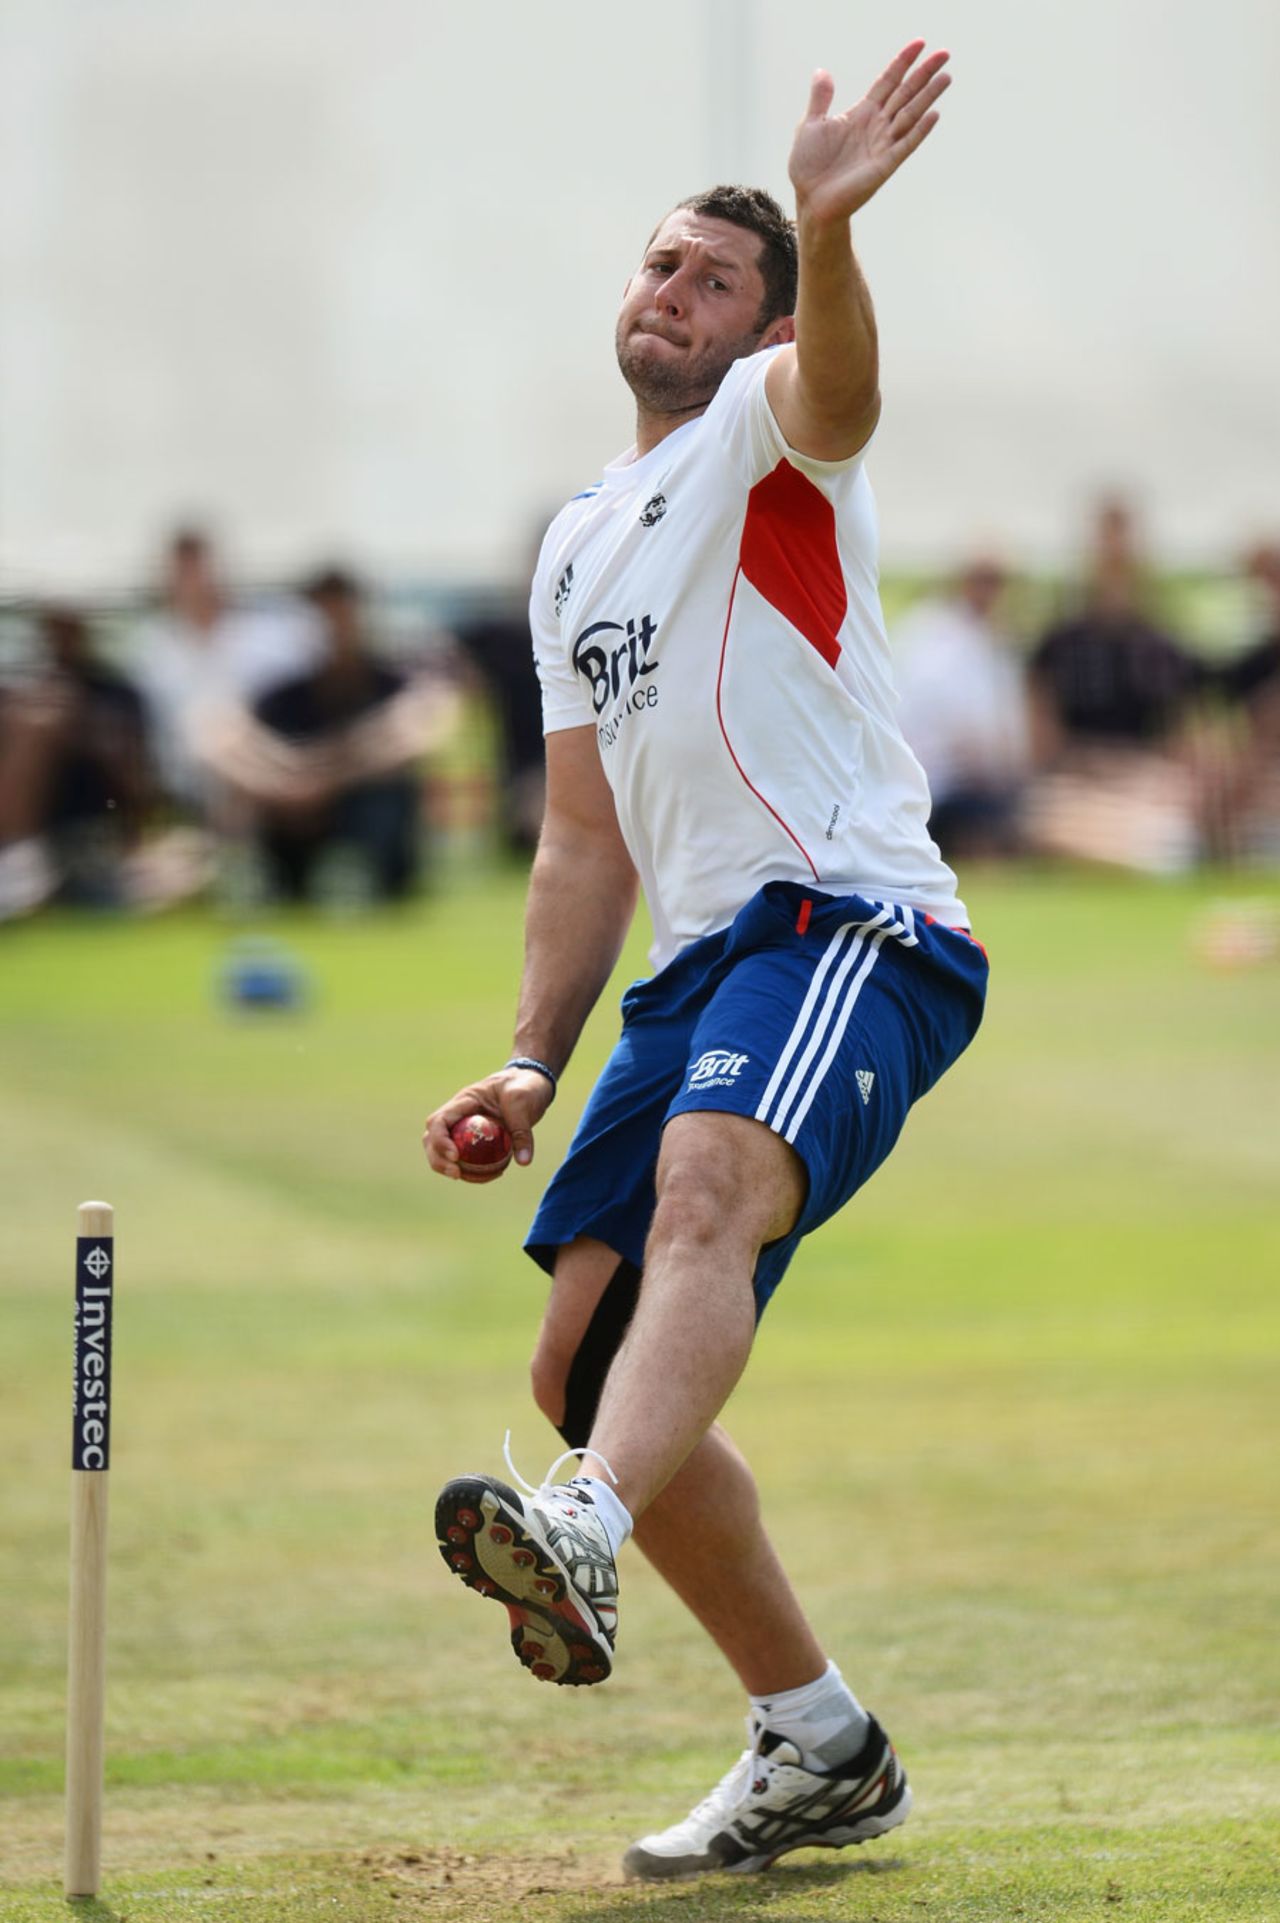 Tim Bresnan bowls during England practice, Lord's, July 16, 2013